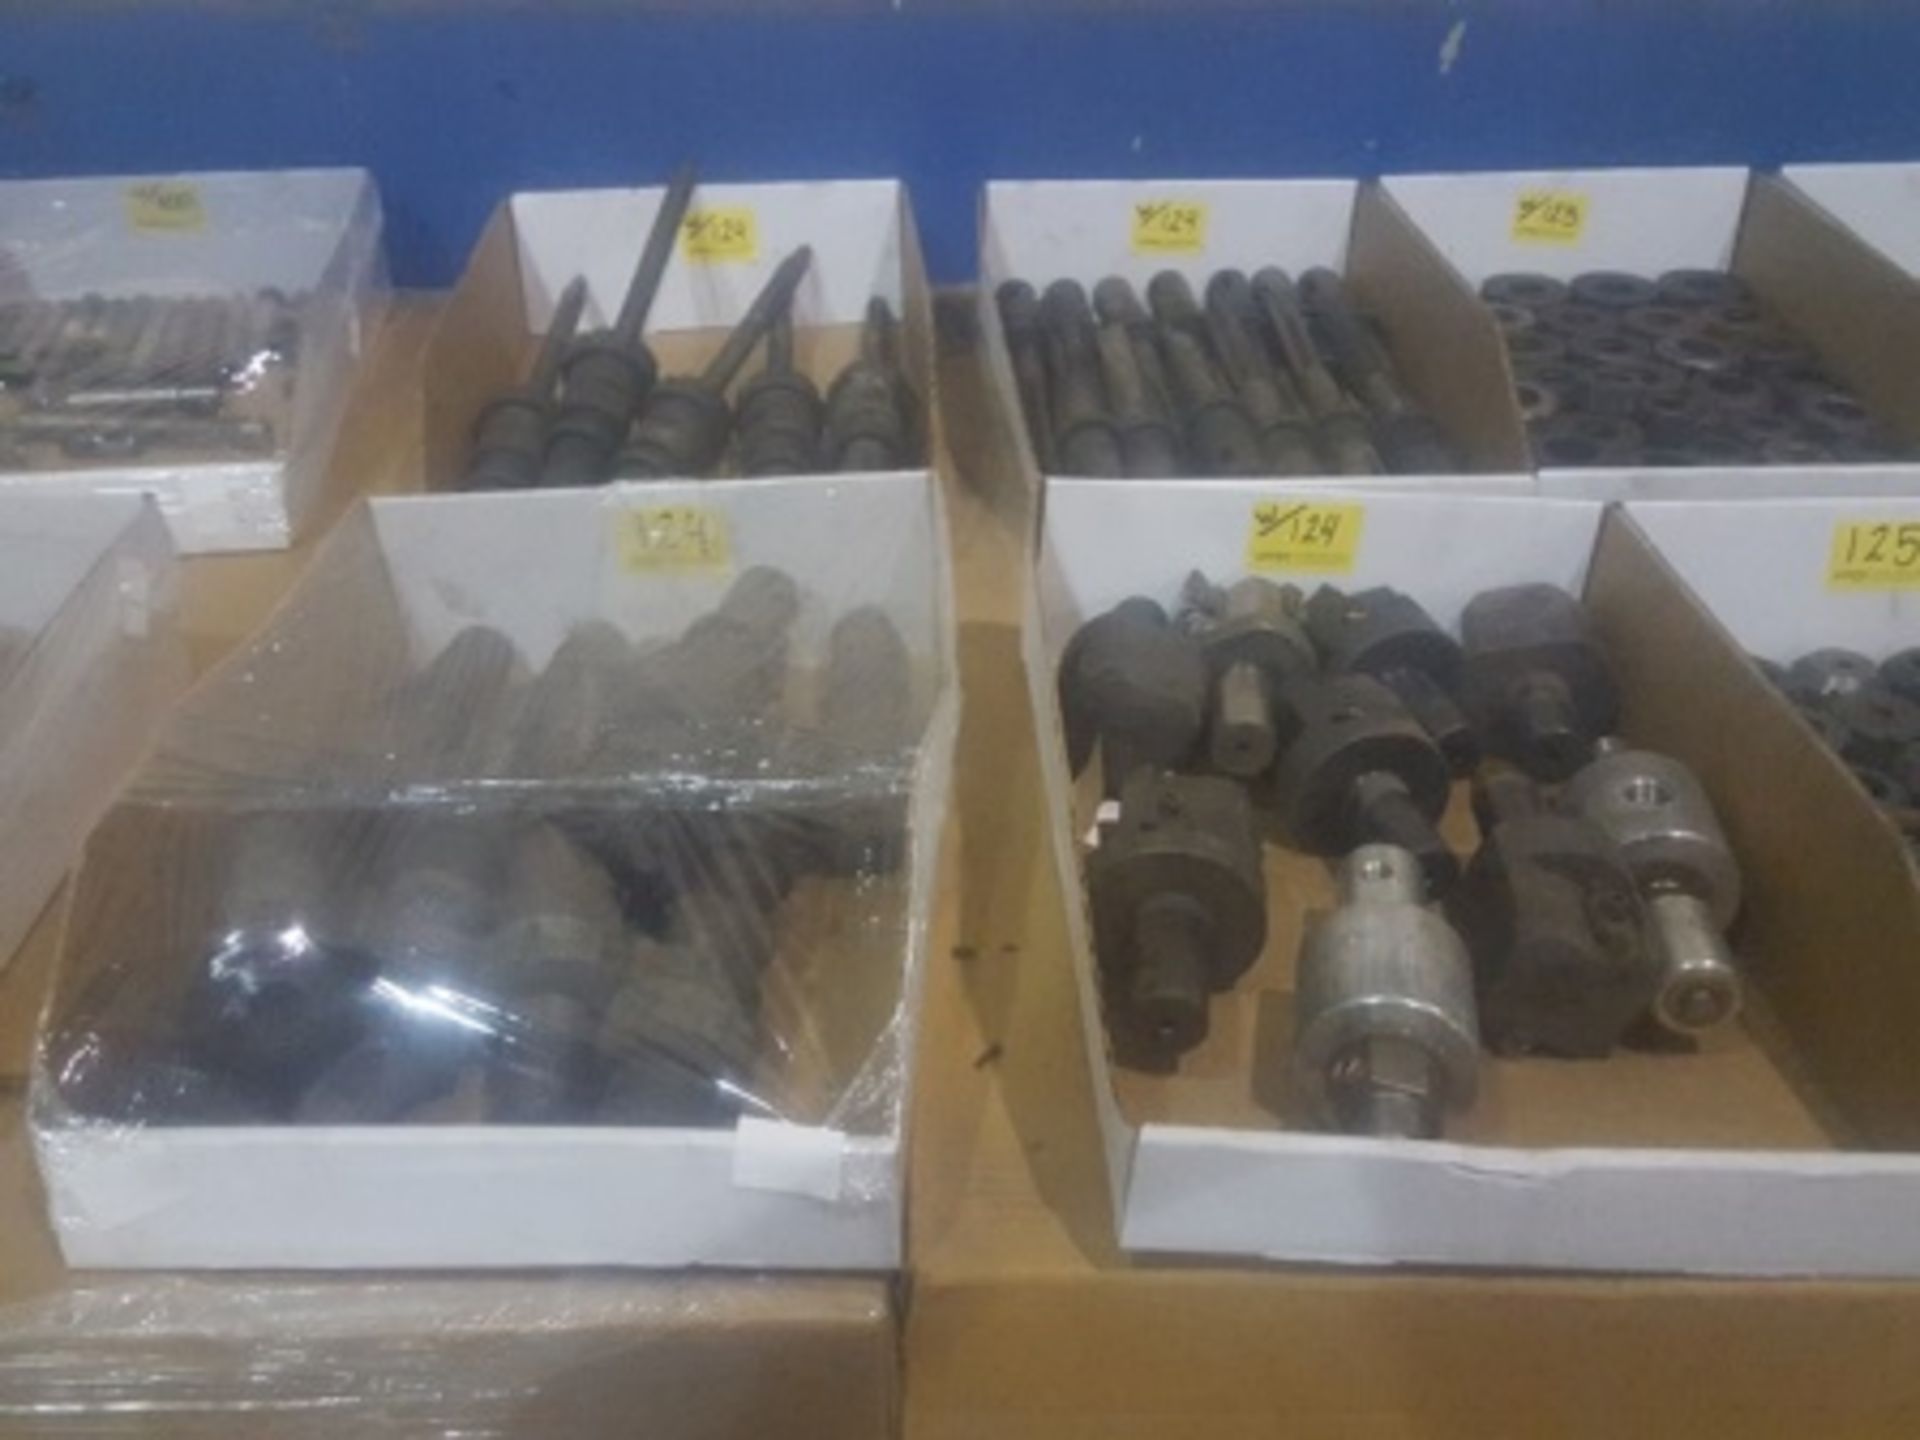 (4) Boxes with CNC tool holders and carbide cutters